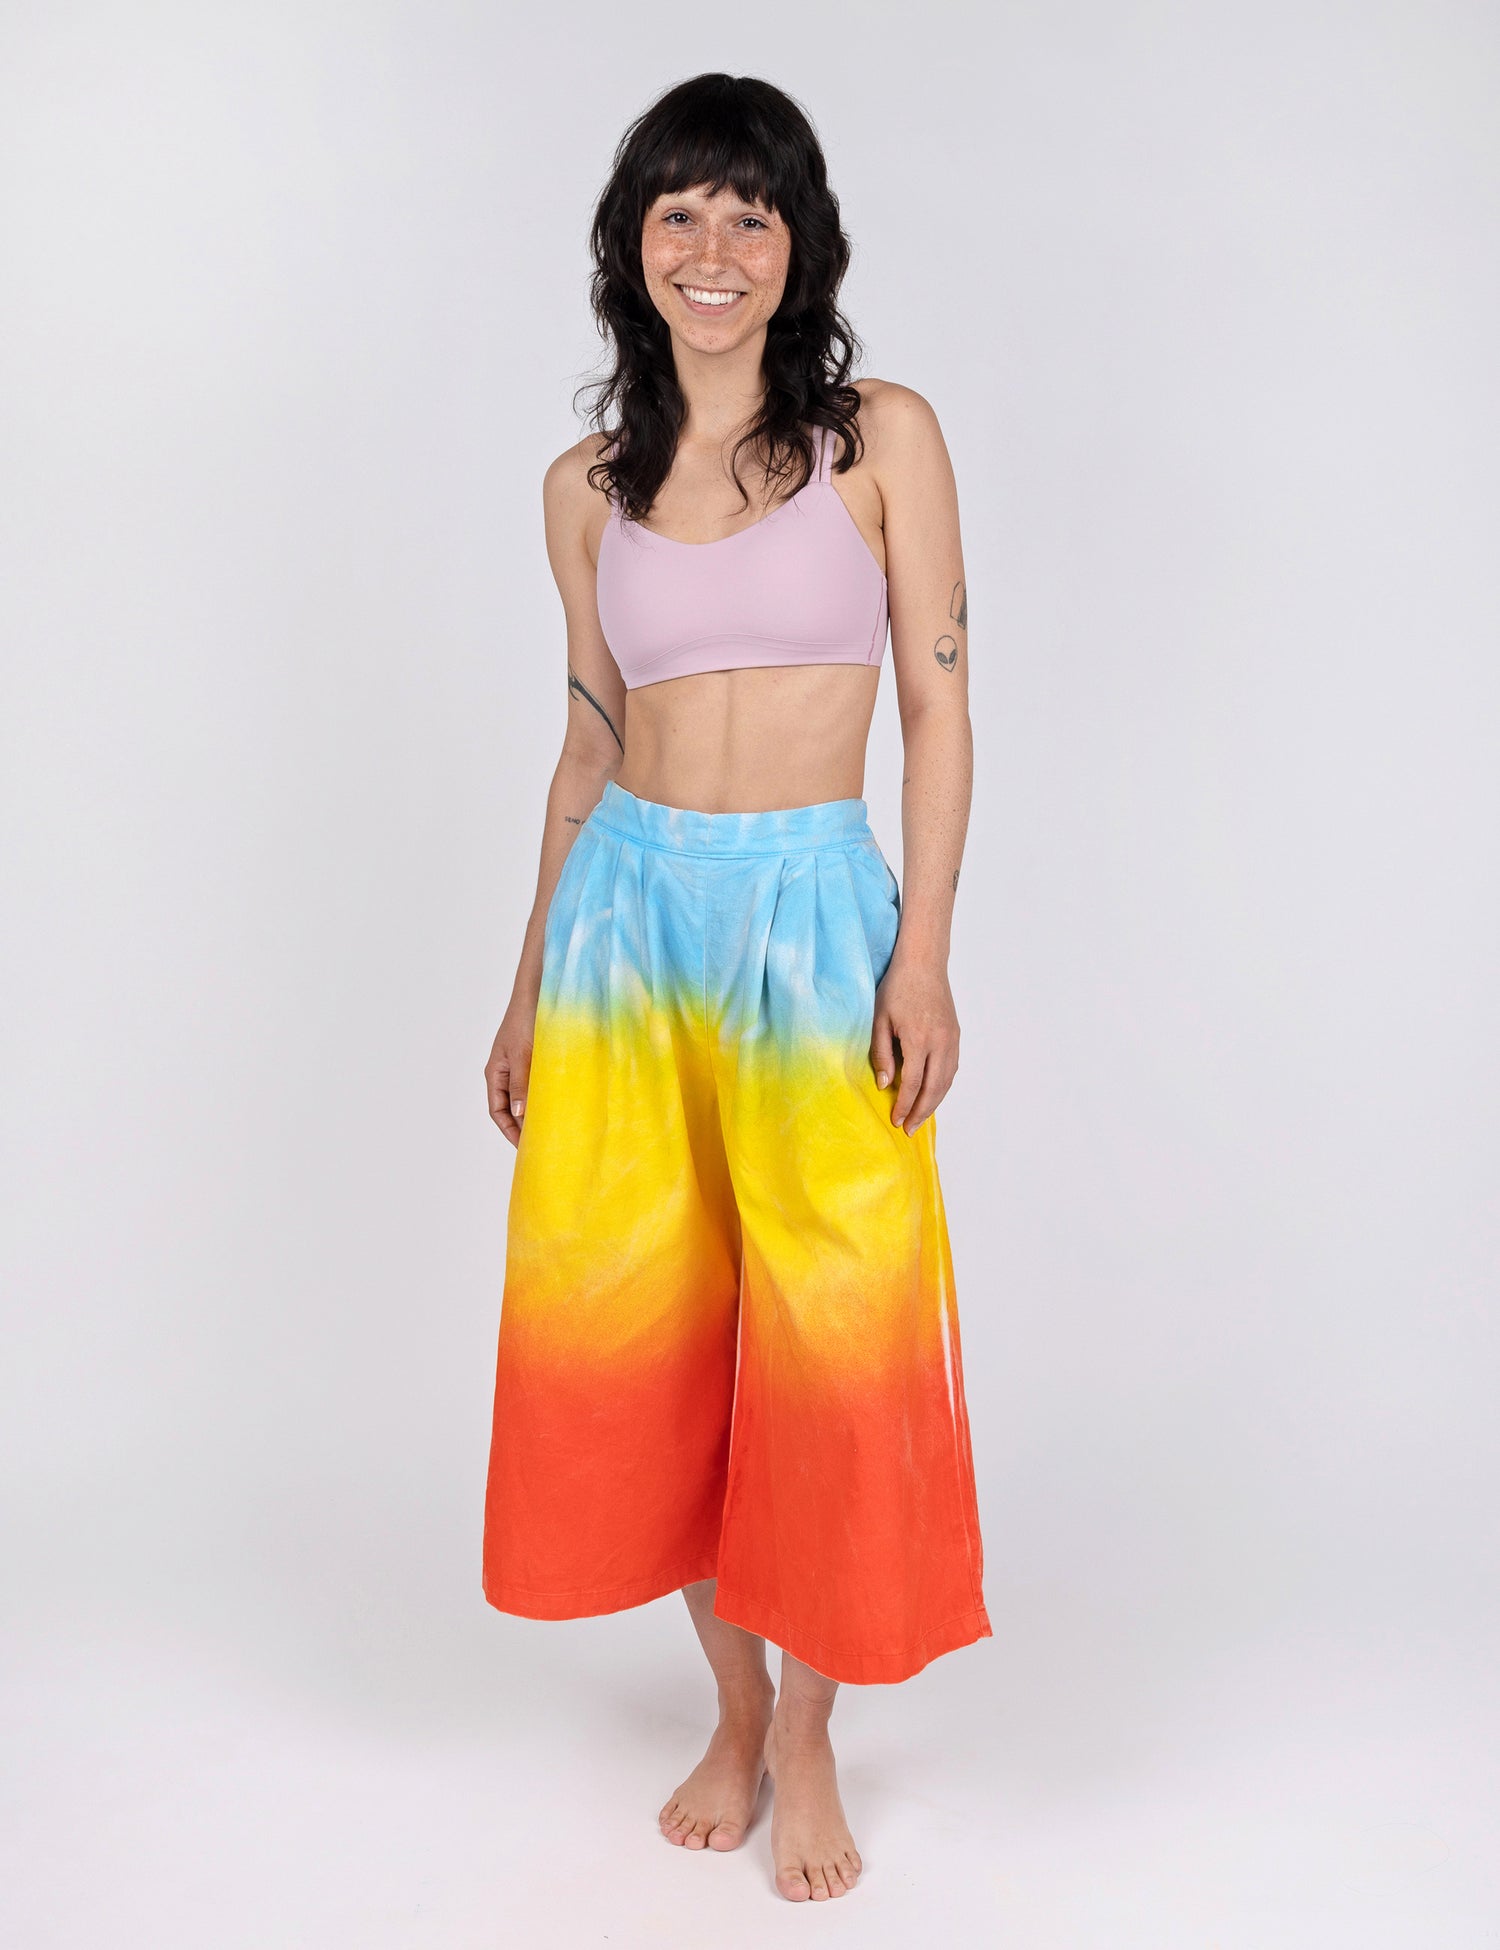 woman wearing culotte pants in gradient design of blue yellow and red orange.